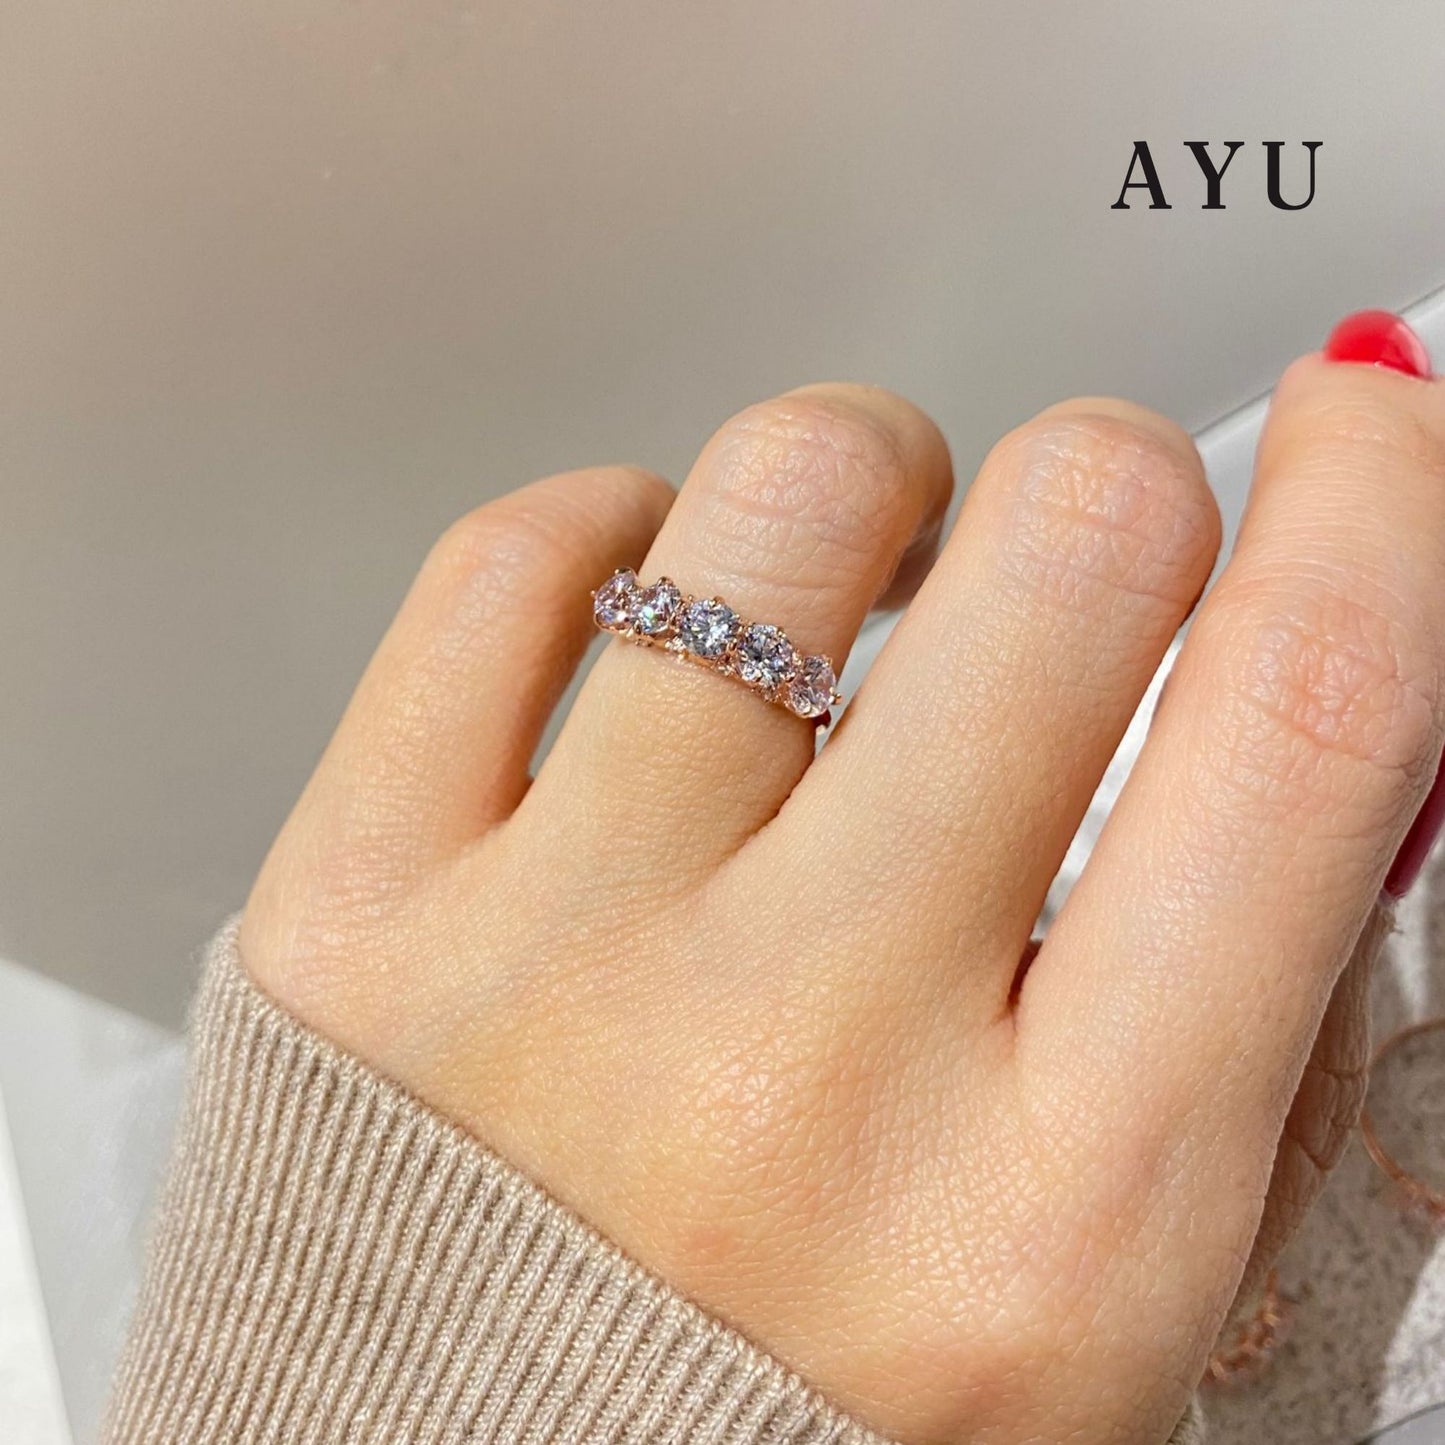 AYU 5 Claw Stones With Thin Ring 17k Rose Gold